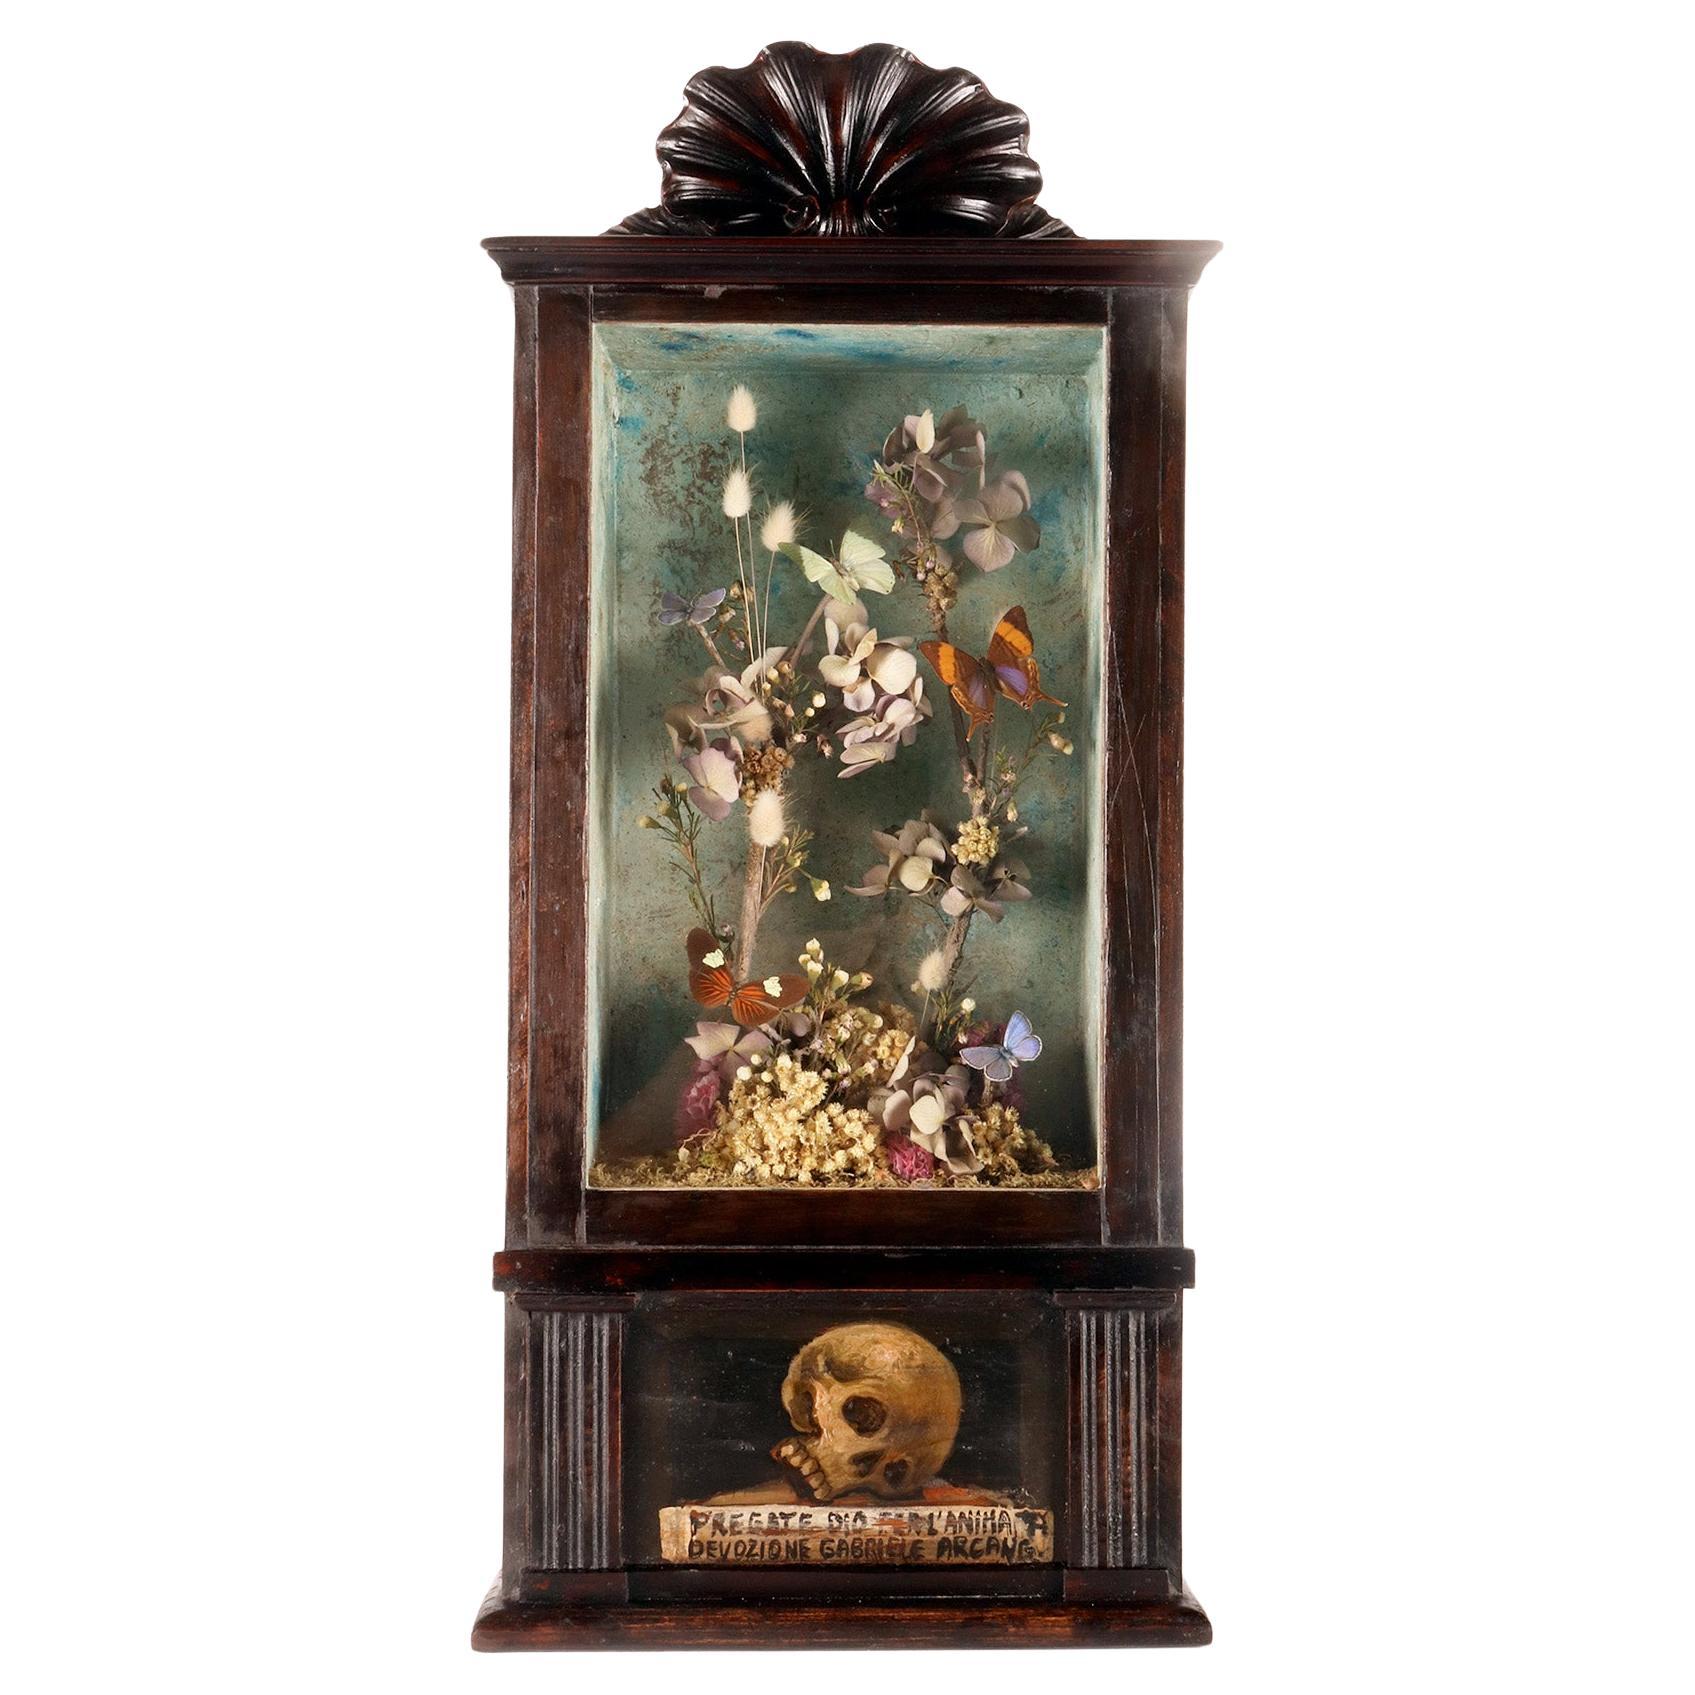 A big diorama with butterflies and flowers with a Memento Mori Italy 1850.